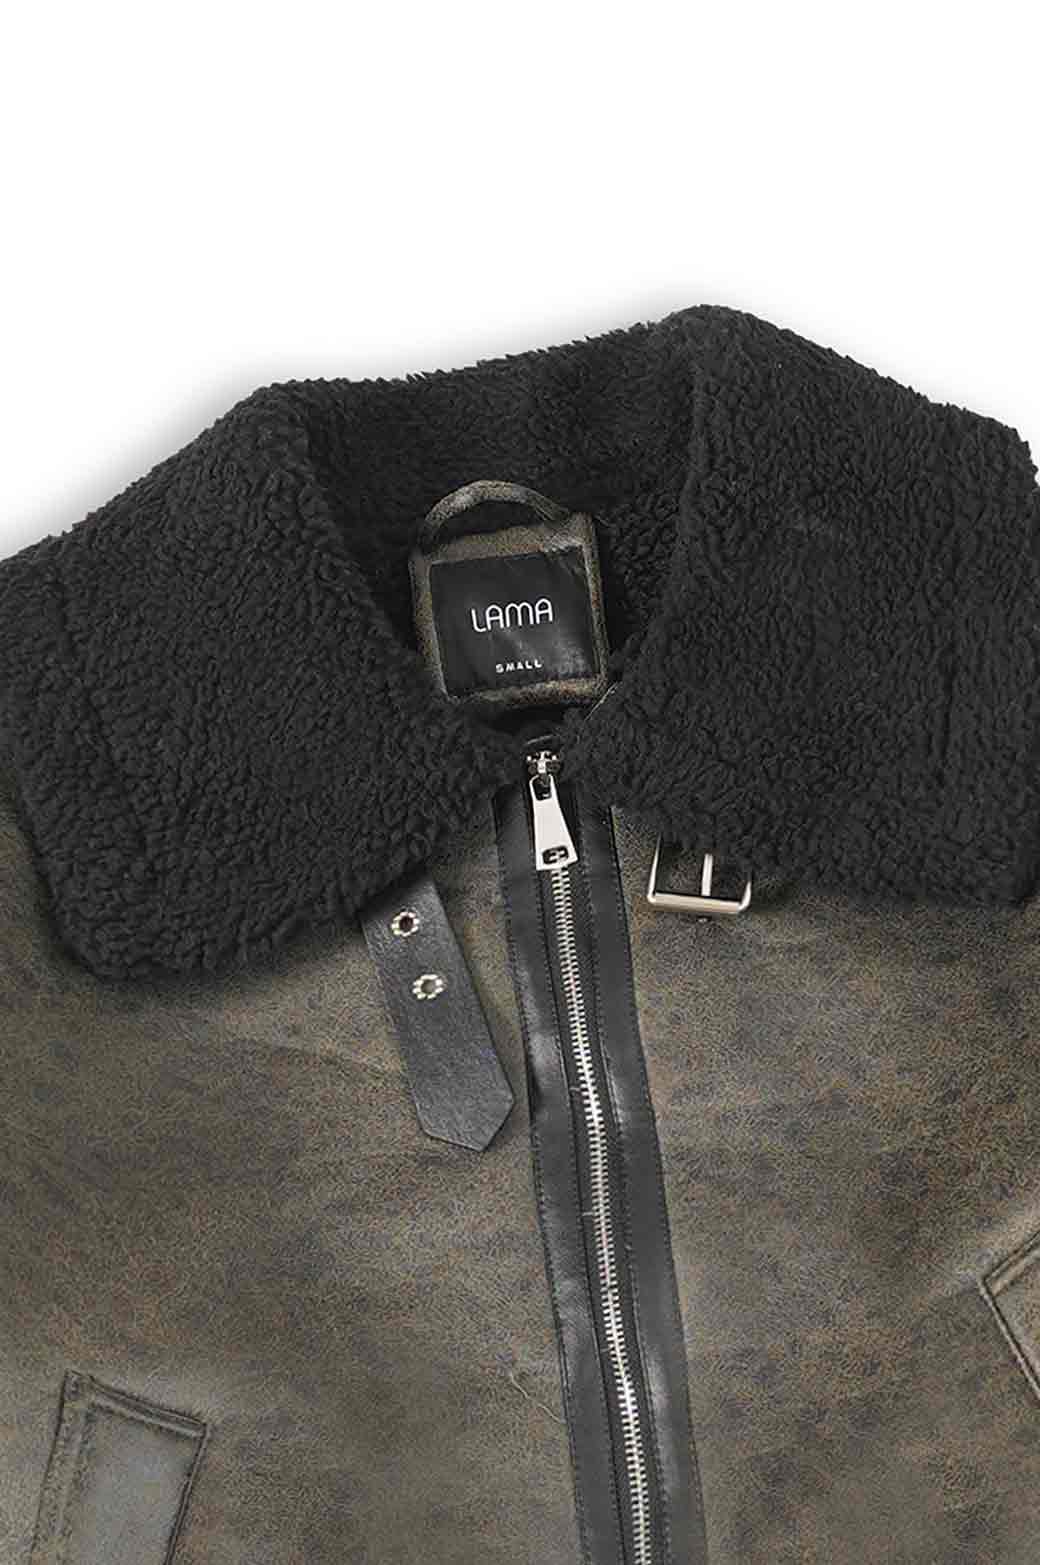 OLIVE ROXY SUEDE SHEARLING JACKET